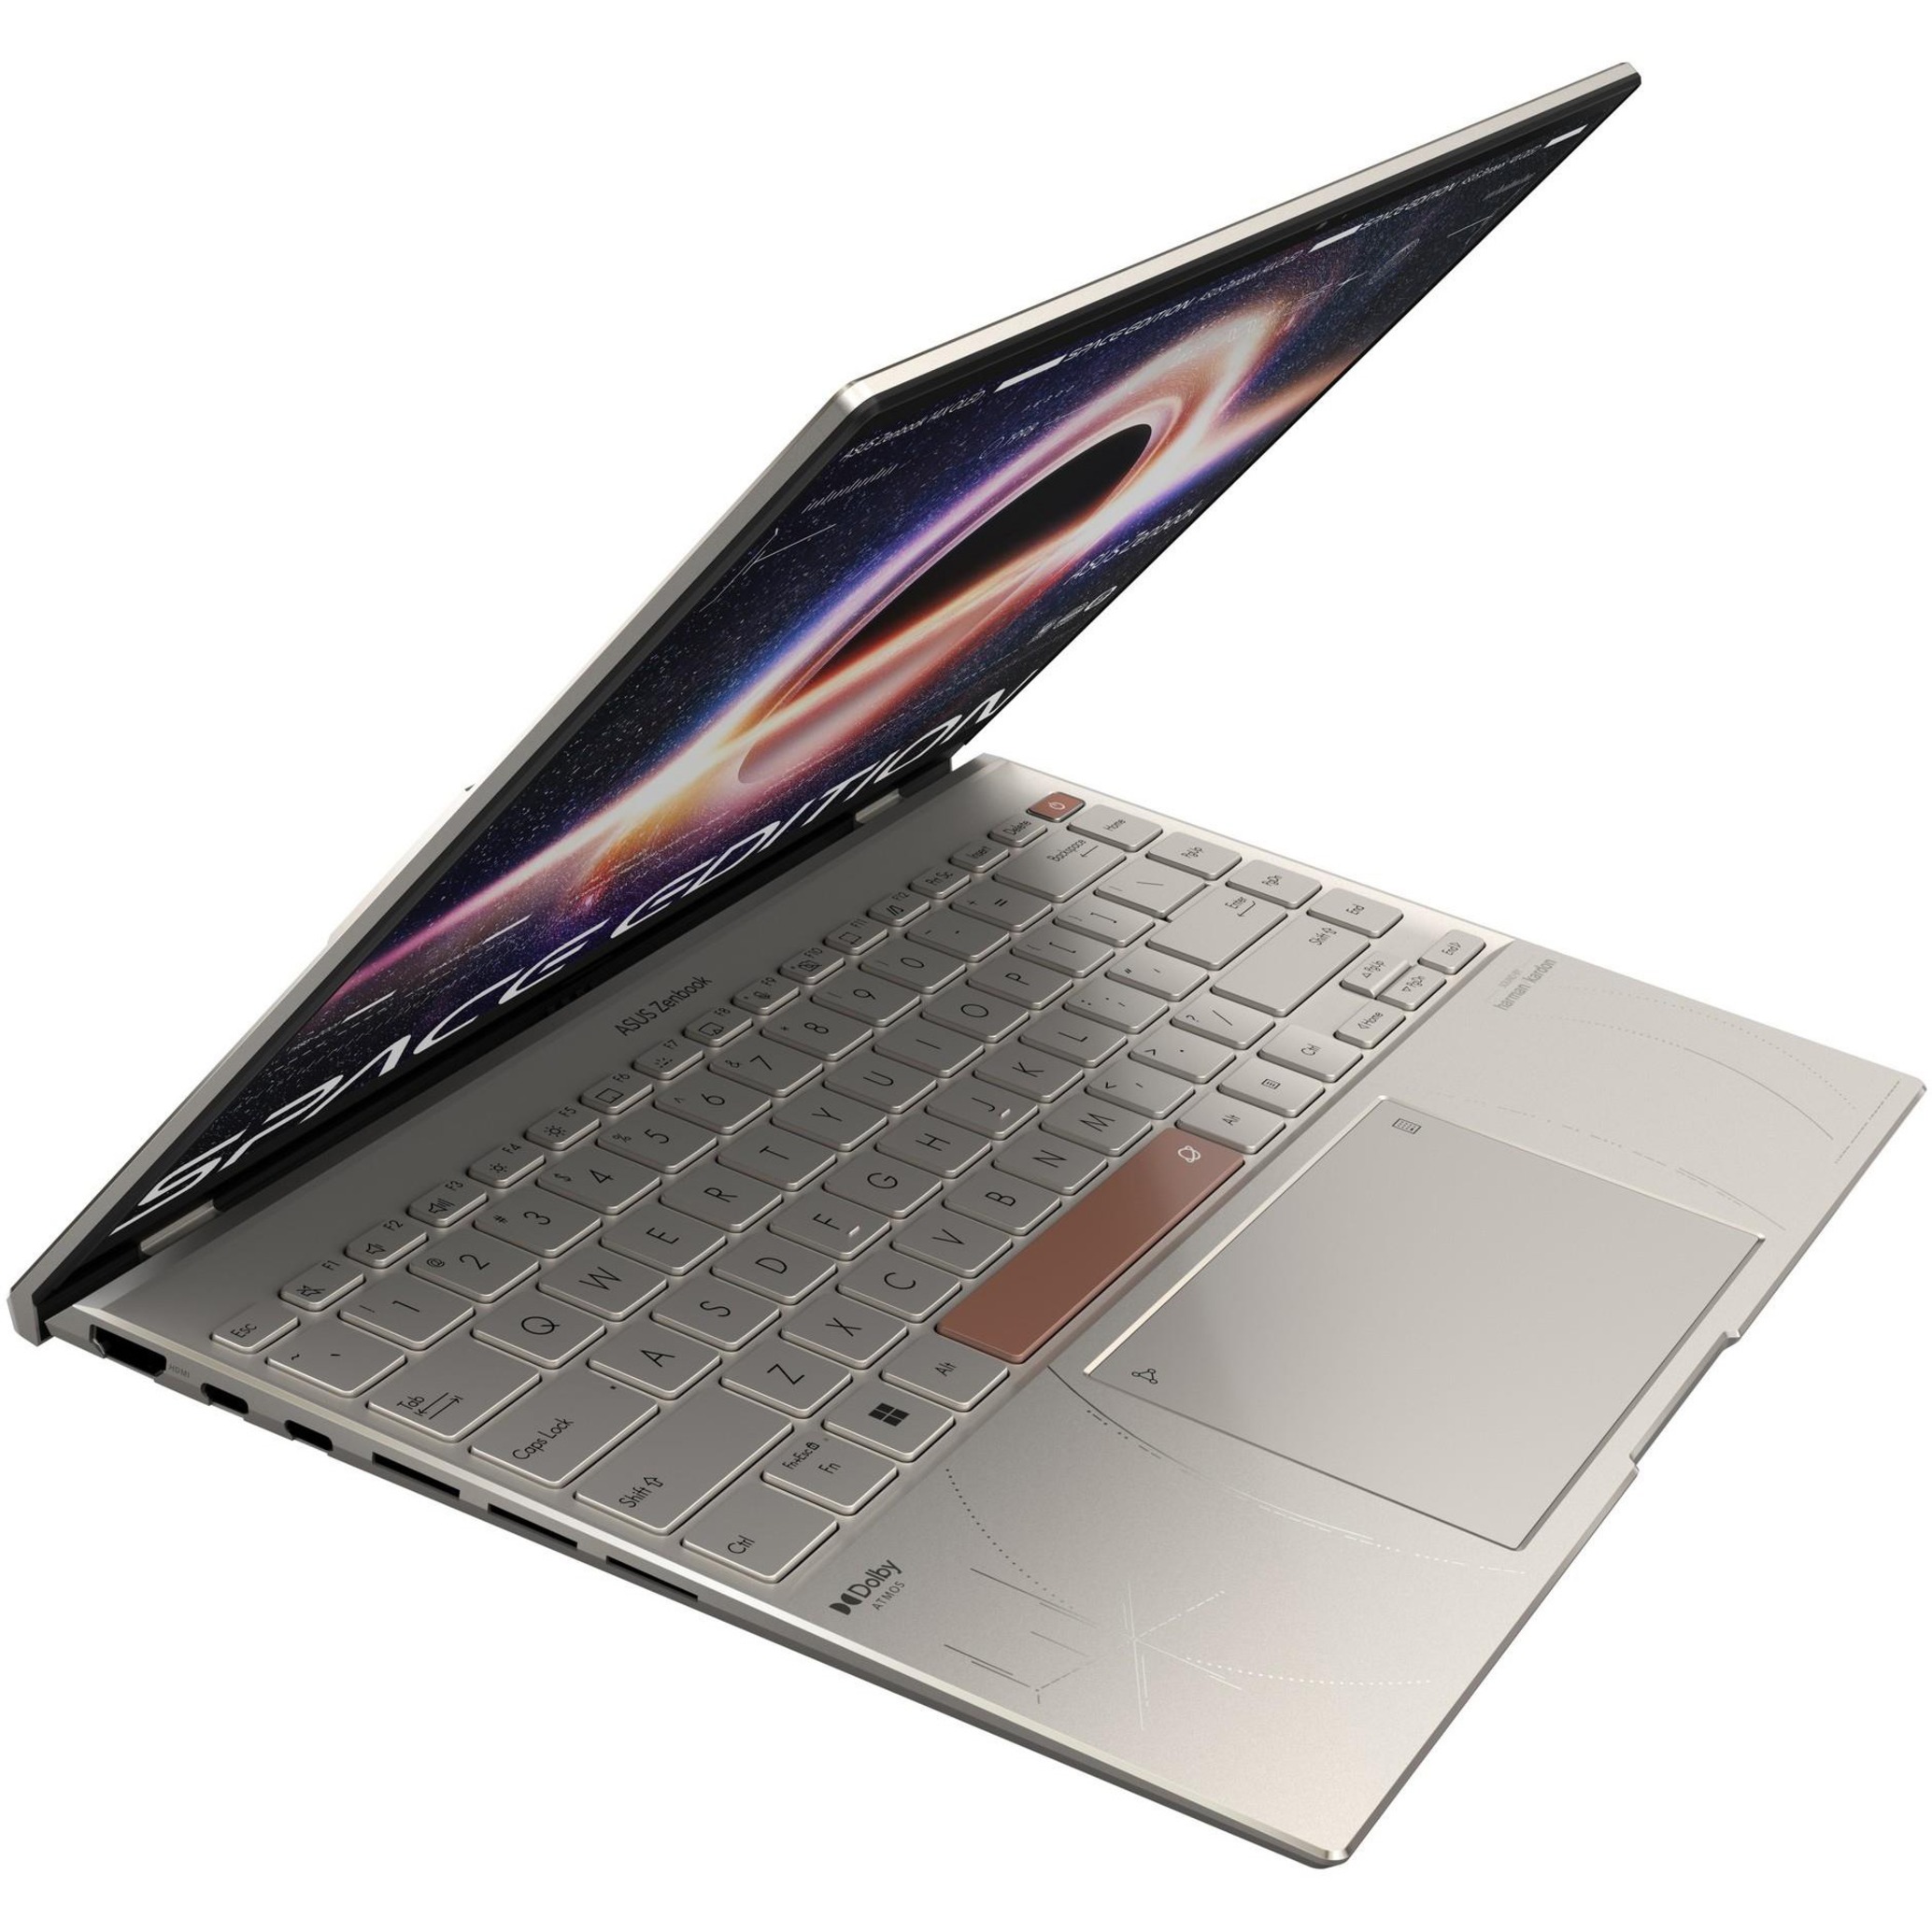 ASUS ZenBook 14X OLED Space Edition Laptop, 14” 2.8K 16:10 OLED Touch  Display, Intel Core i9-12900H CPU, 32GB RAM, 1TB SSD, Windows 11 Pro,  ZenVision